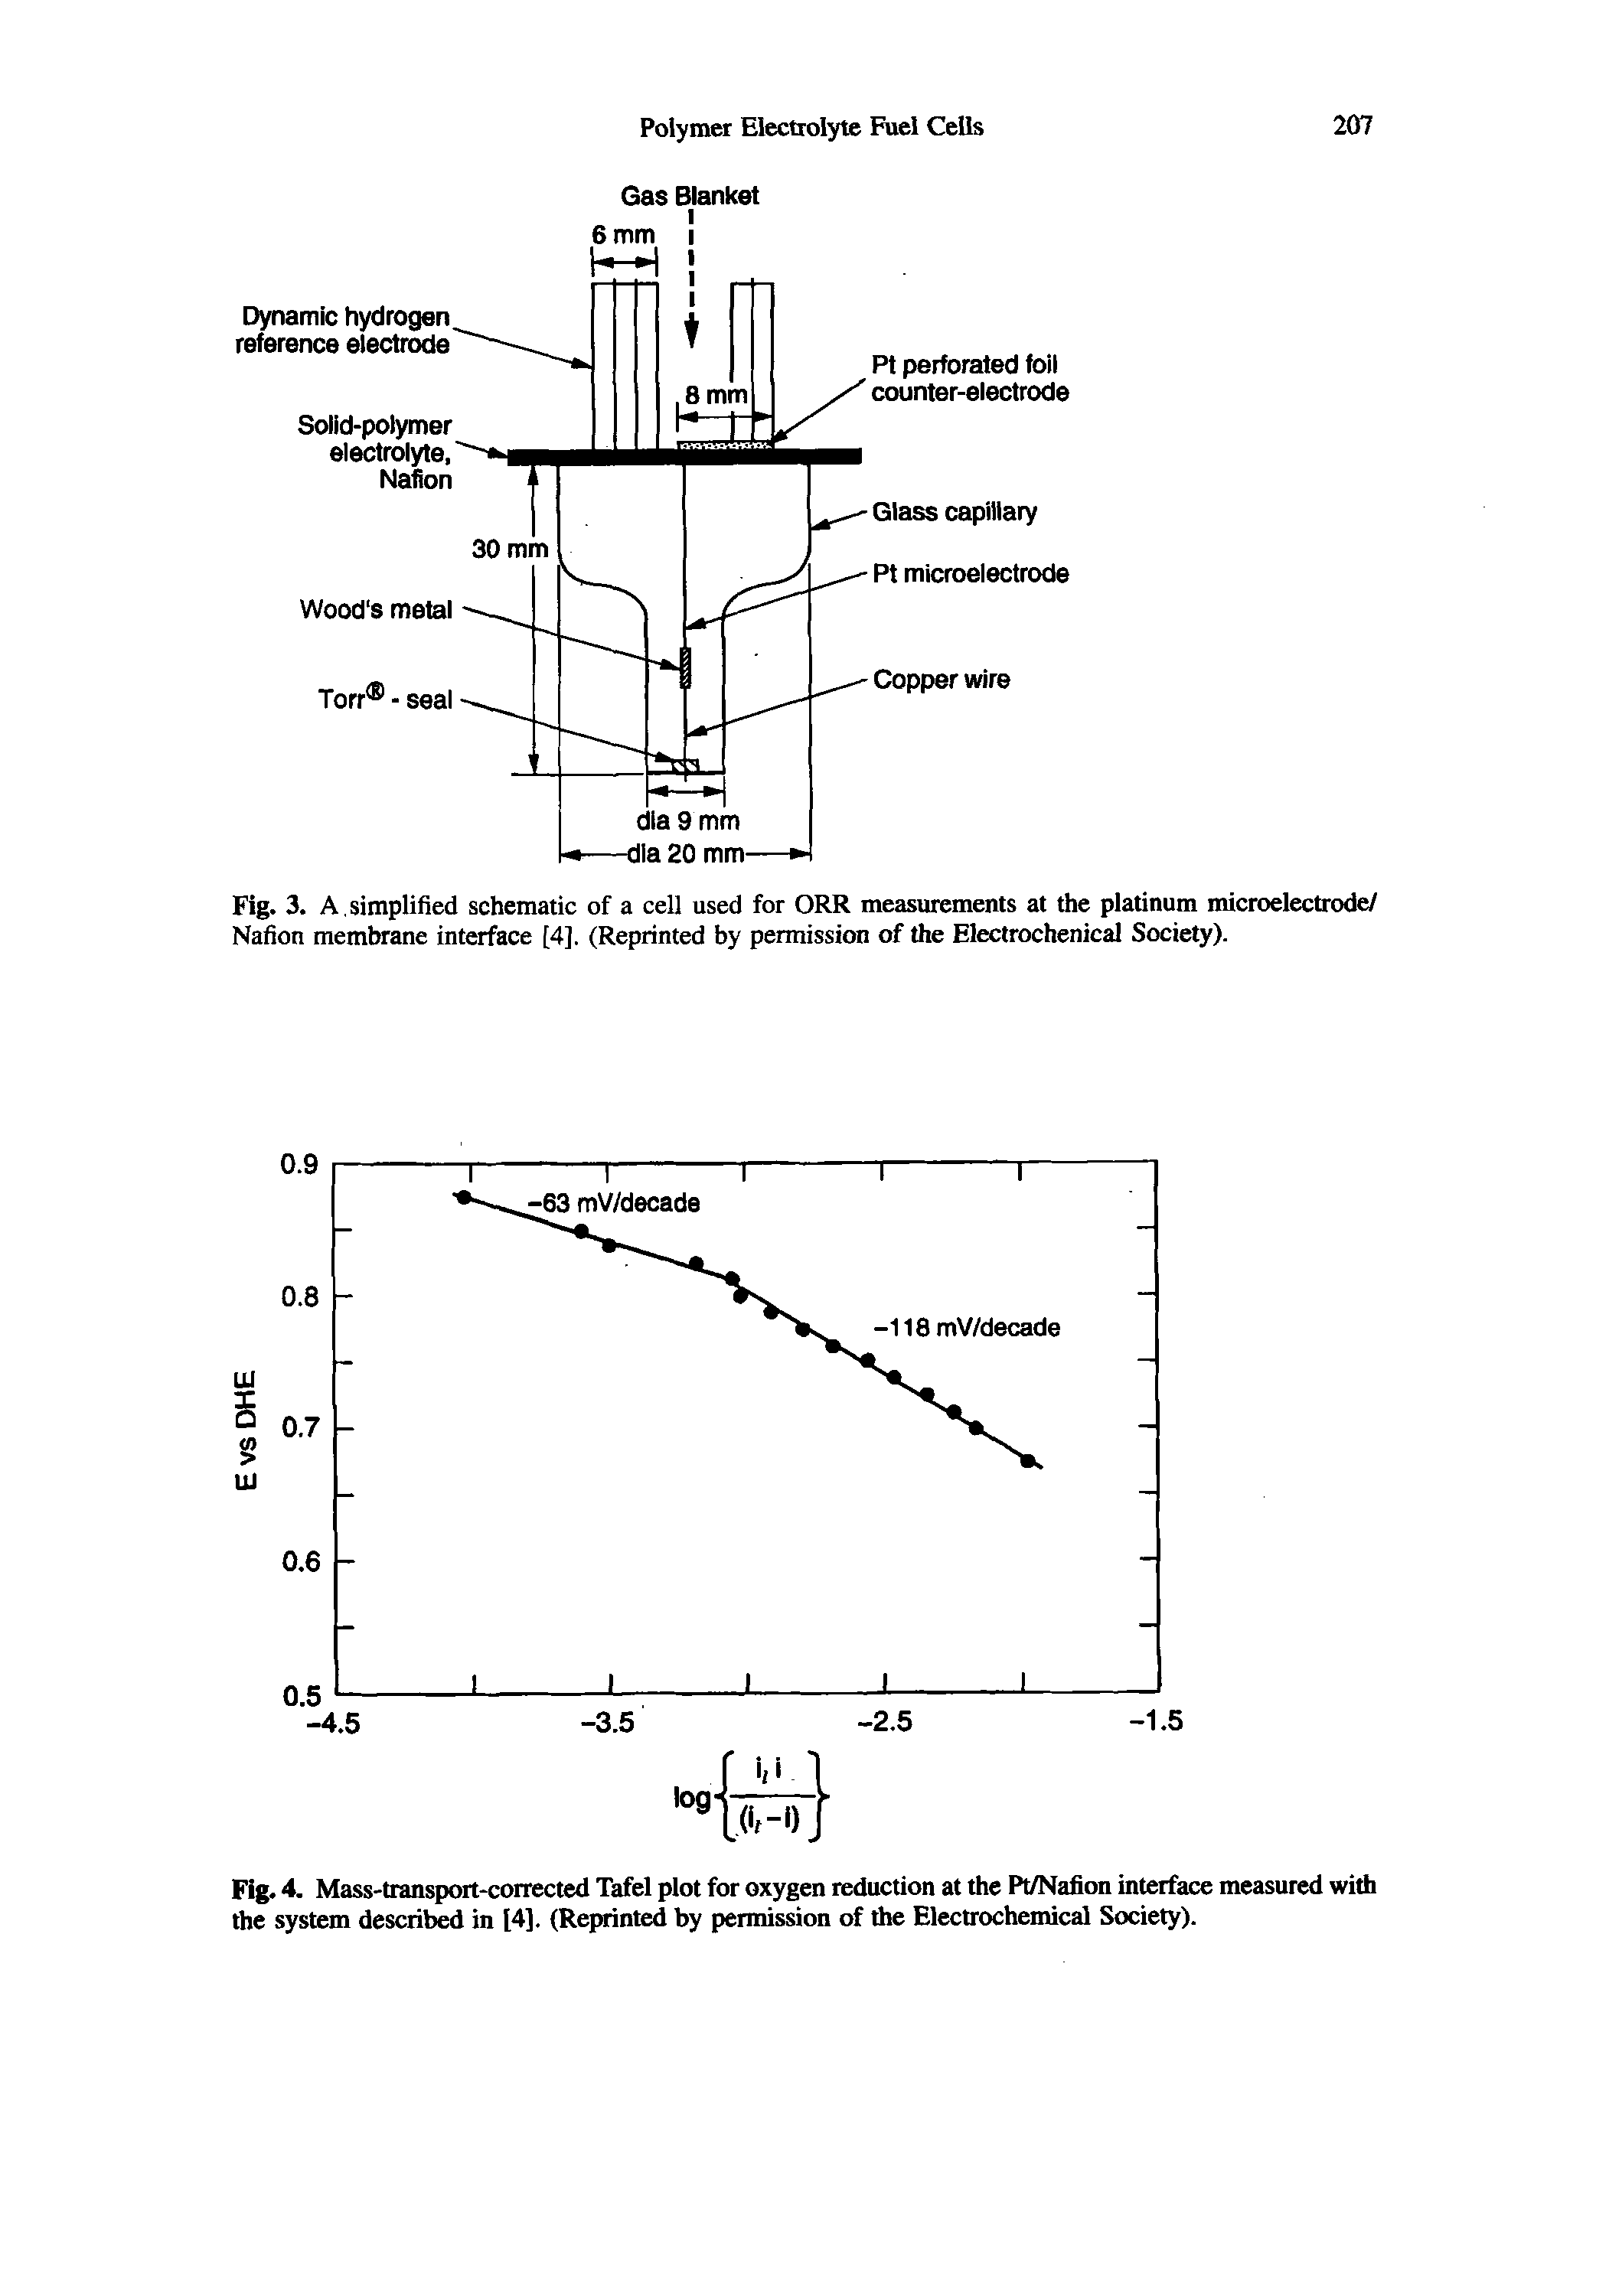 Fig. 4. Mass-transport-corrected Tafel piot for oxygen reduction at the Pt/Nafion interface measured with the system described in [4]. (Reprinted by permission of the Electrochemical Society).